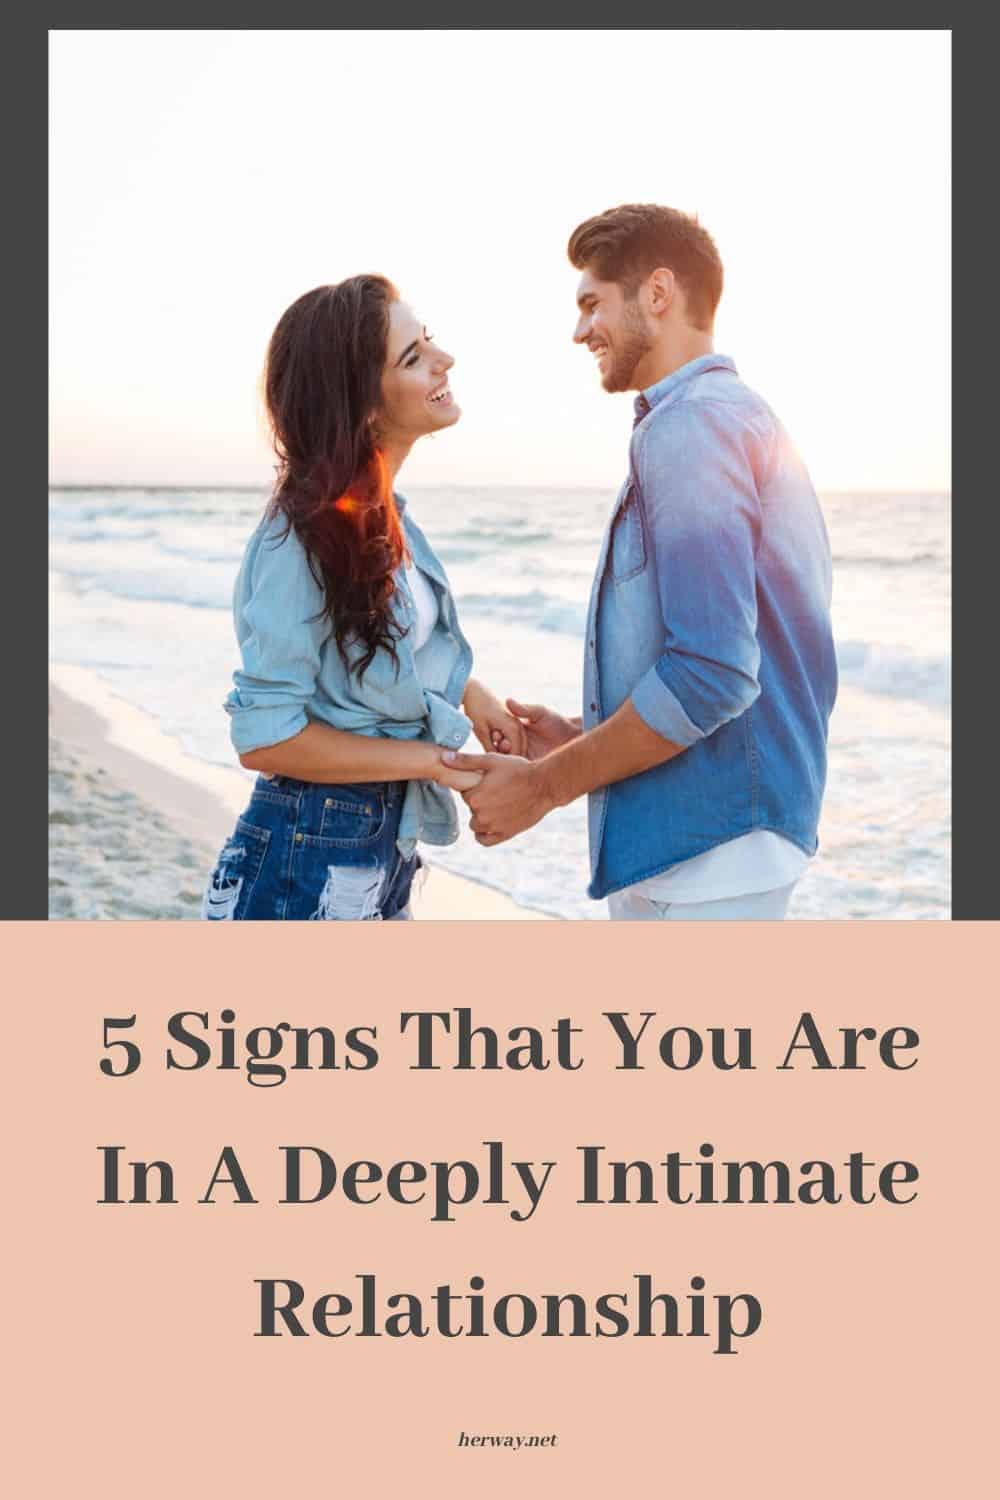 5 Signs That You Are In A Deeply Intimate Relationship